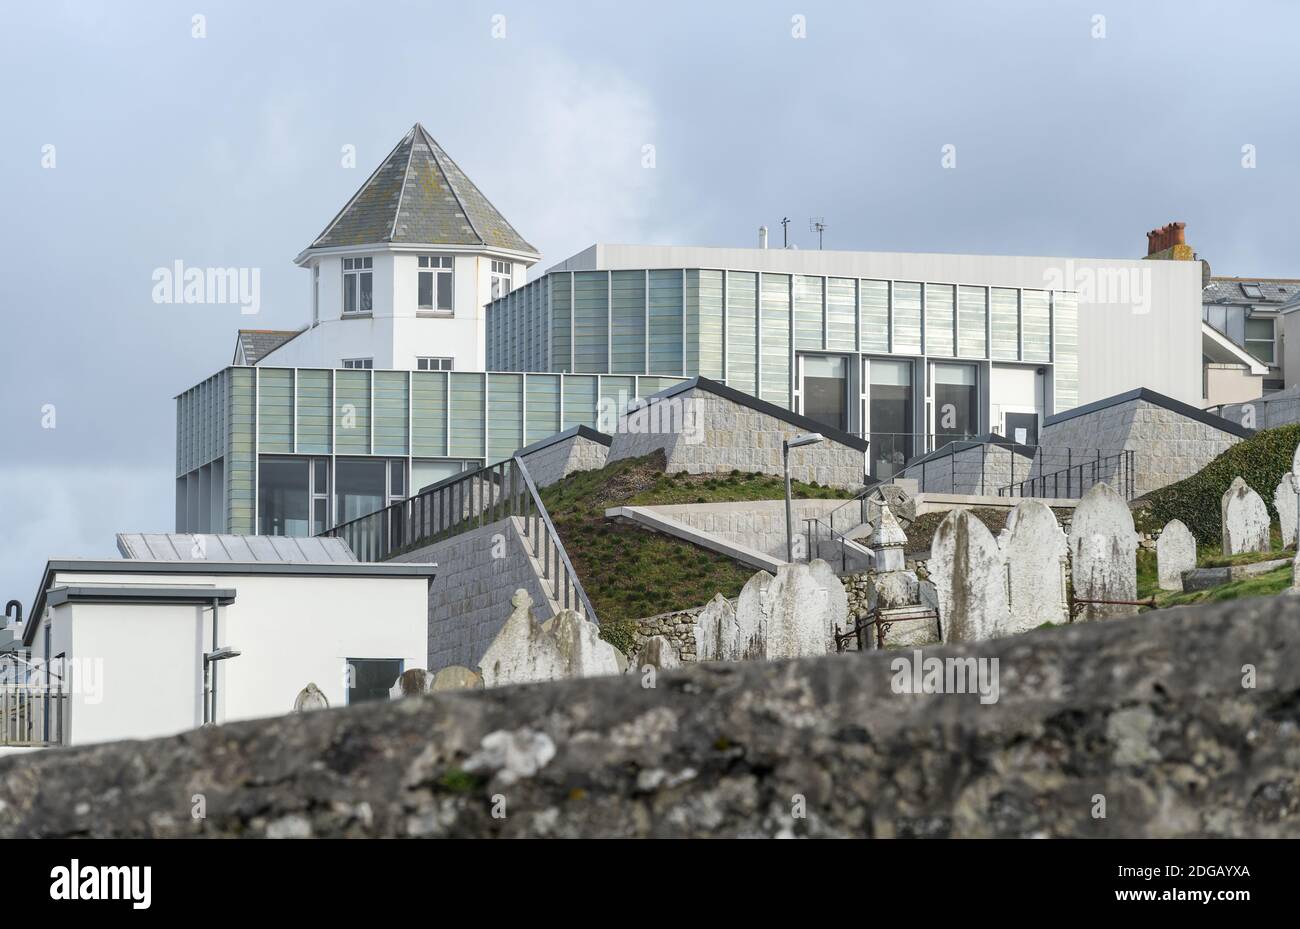 Views of Tate St Ives art gallery in St Ives, Cornwall, England, UK Stock Photo